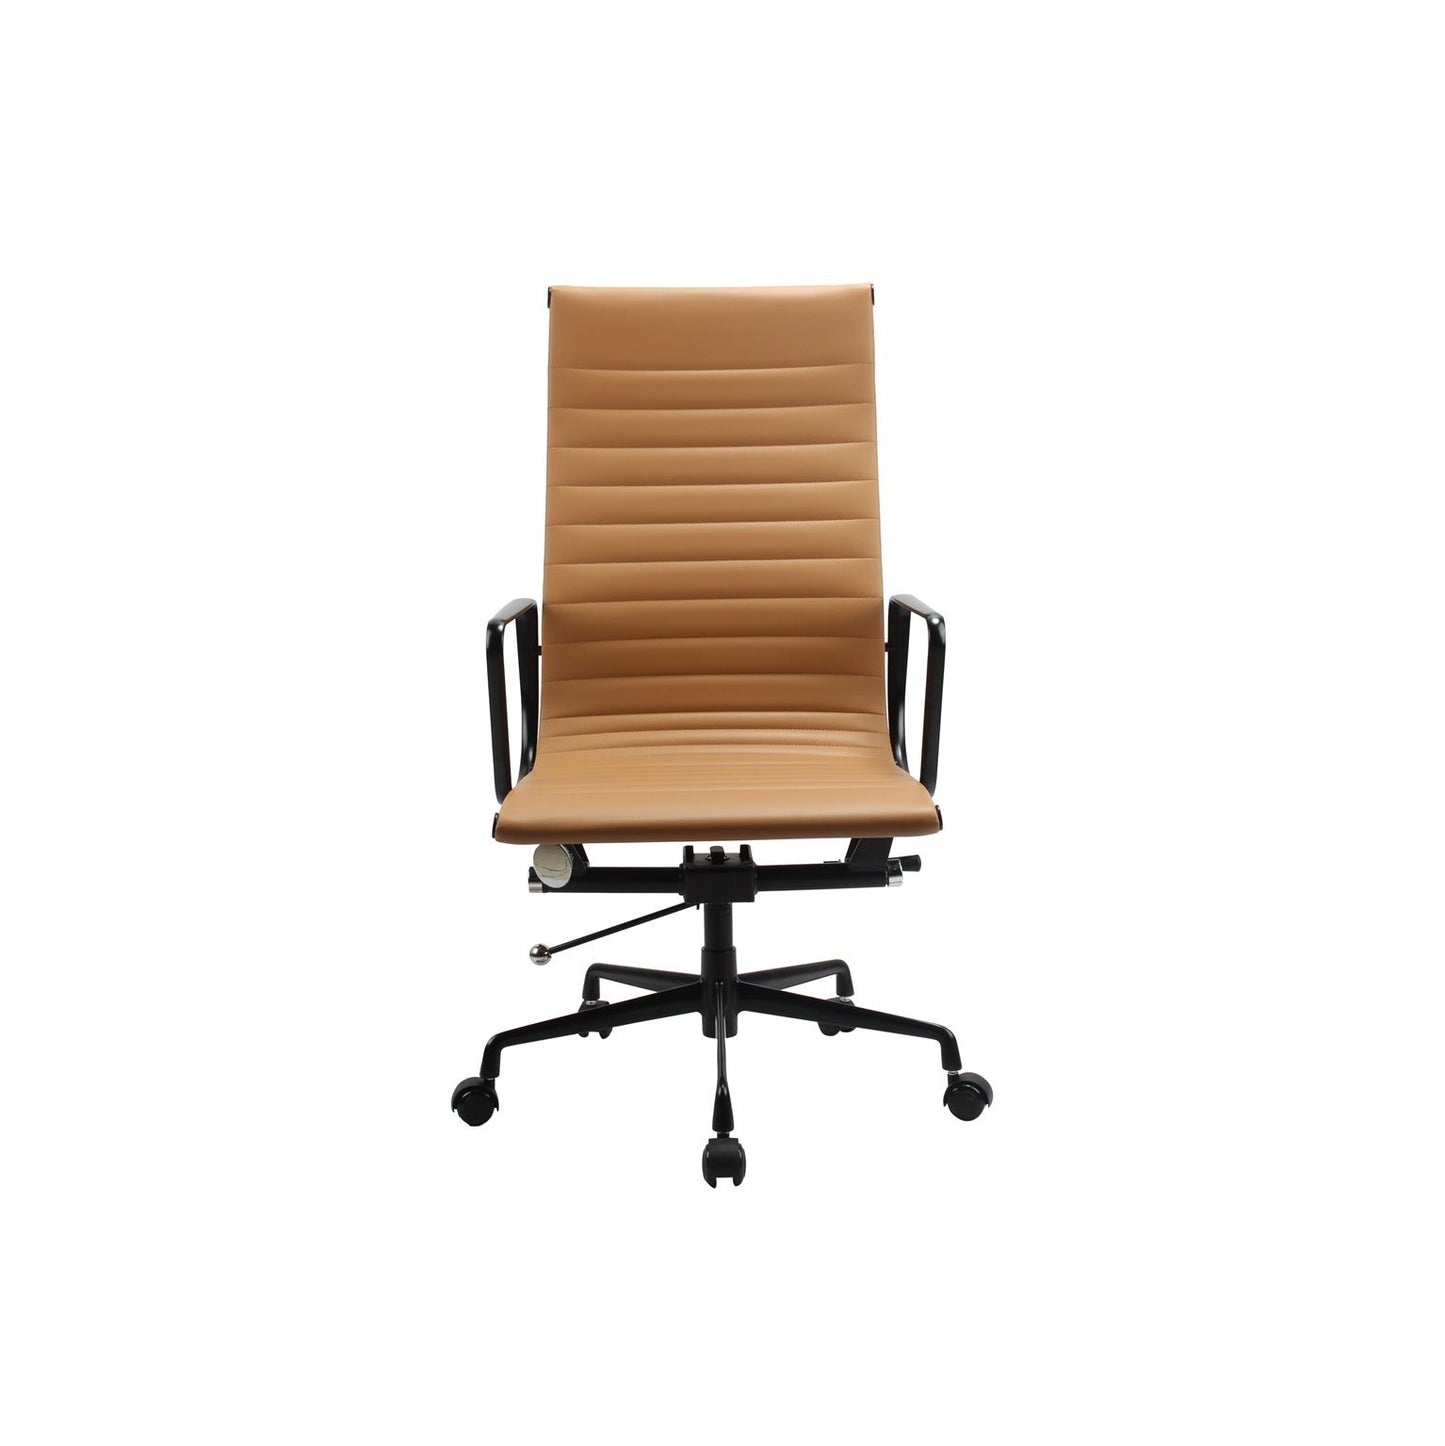 Replica Genuine Leather High Back Office Chair Beige color in stock